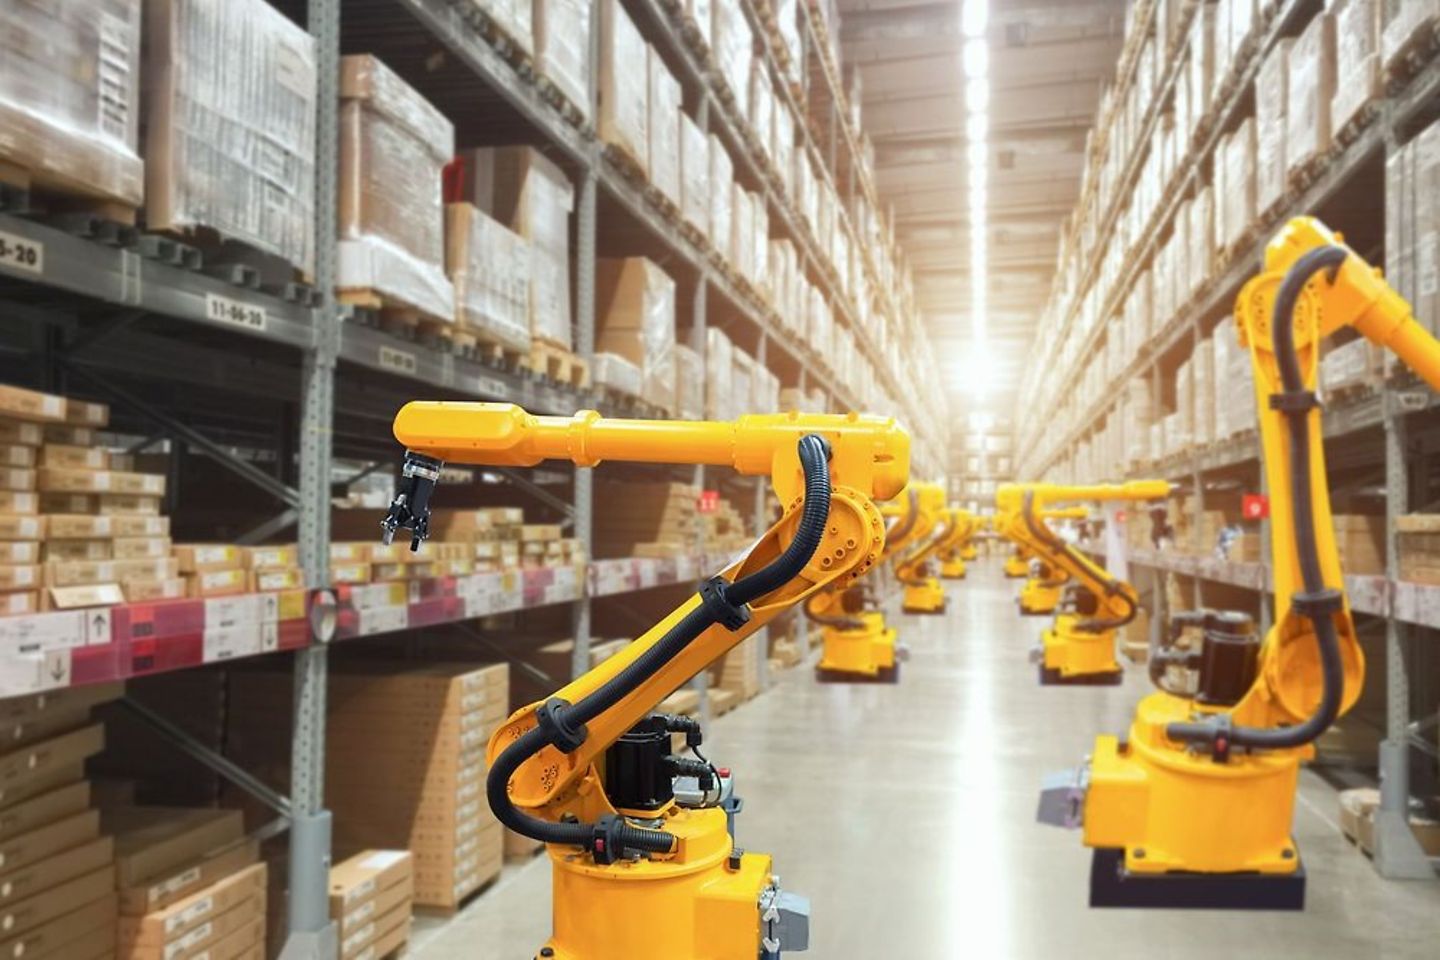 Robots in warehouse sort parcels for retailers